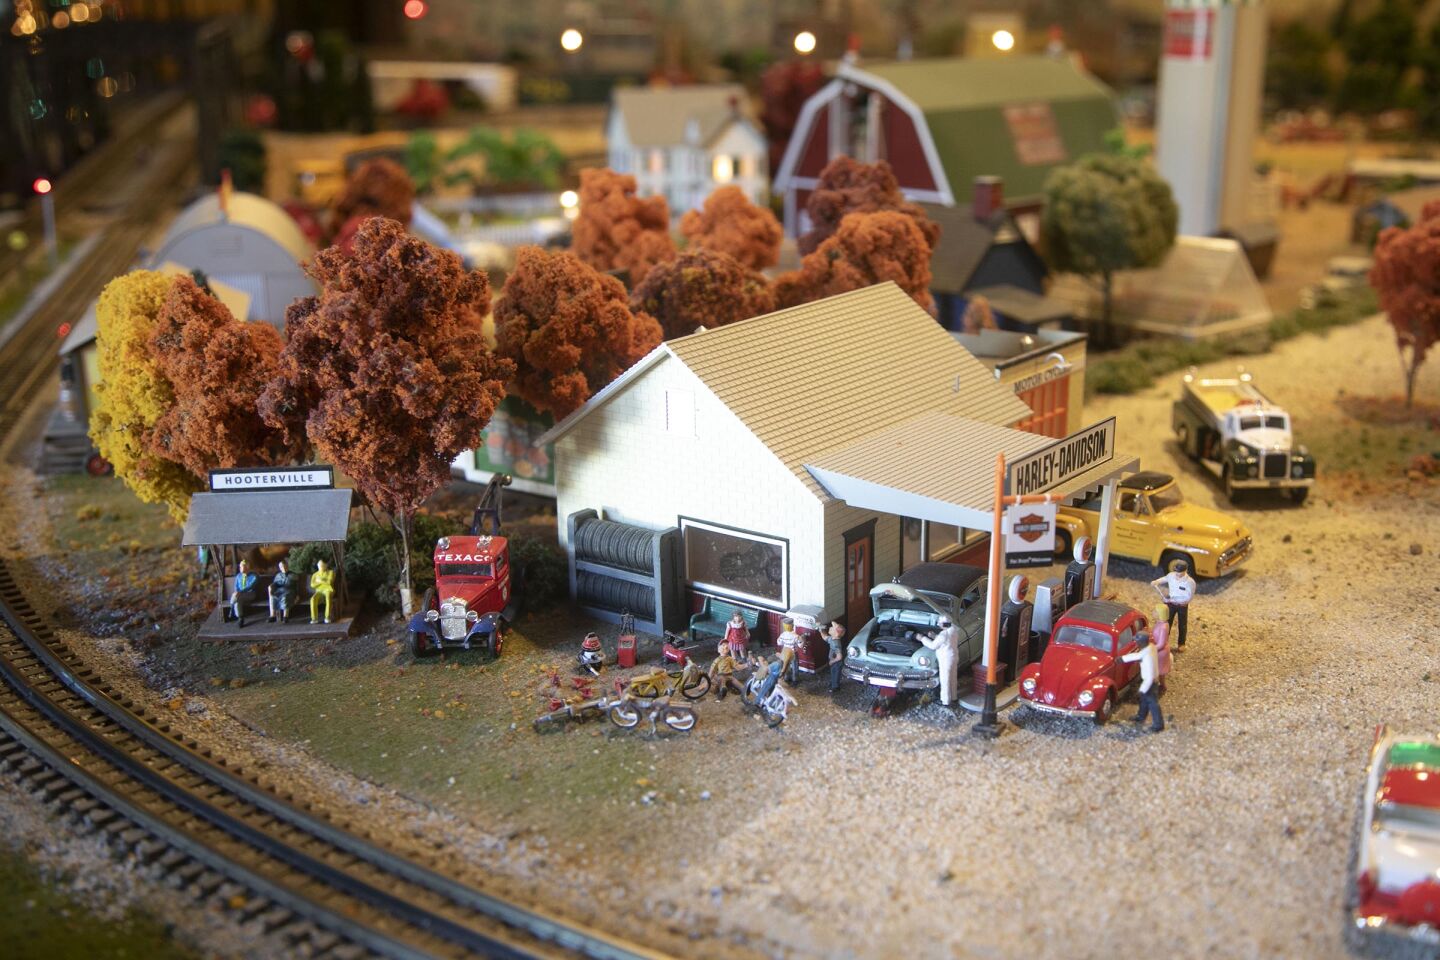 David Lizerbram and his wife Mana Monzavi took over the Old Town Model Railroad Depot, which was in danger of closing. The extensive train layout and its detailed and sometimes humorous dioramas was photographed on Friday, Dec. 13, 2019, at its Old Town, San Diego location. A countryside gas station.